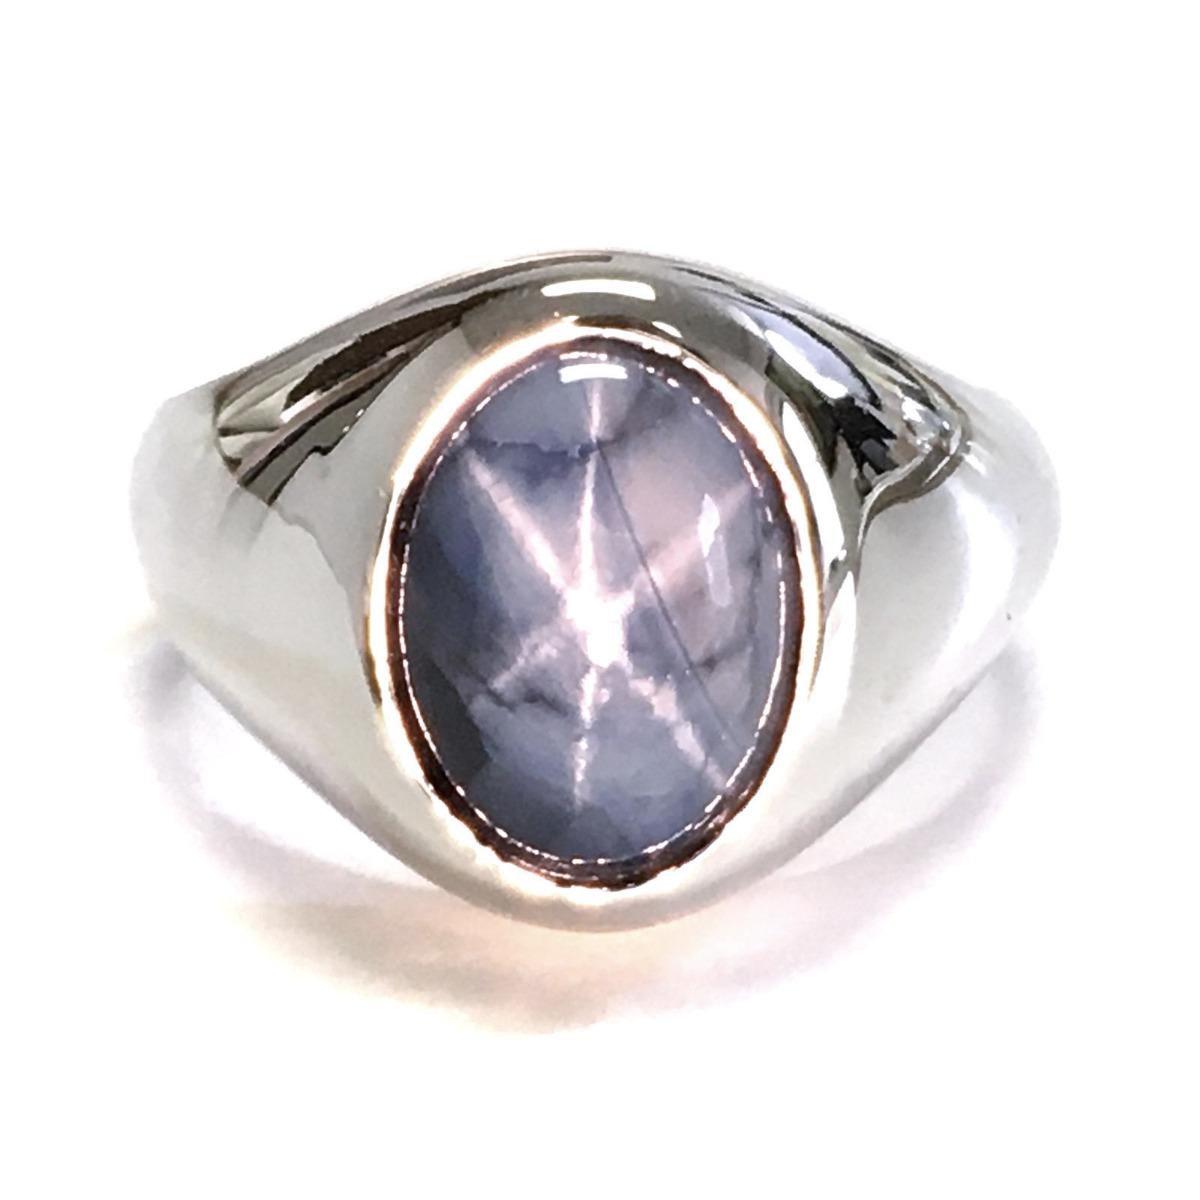 This white gold men's ring is a true statement piece, featuring a remarkable 9.00-carat Star Sapphire. The vivid blue hue of the sapphire creates a mesmerizing, hypnotic effect, and the gem displays a sharp and distinct star pattern with six rays